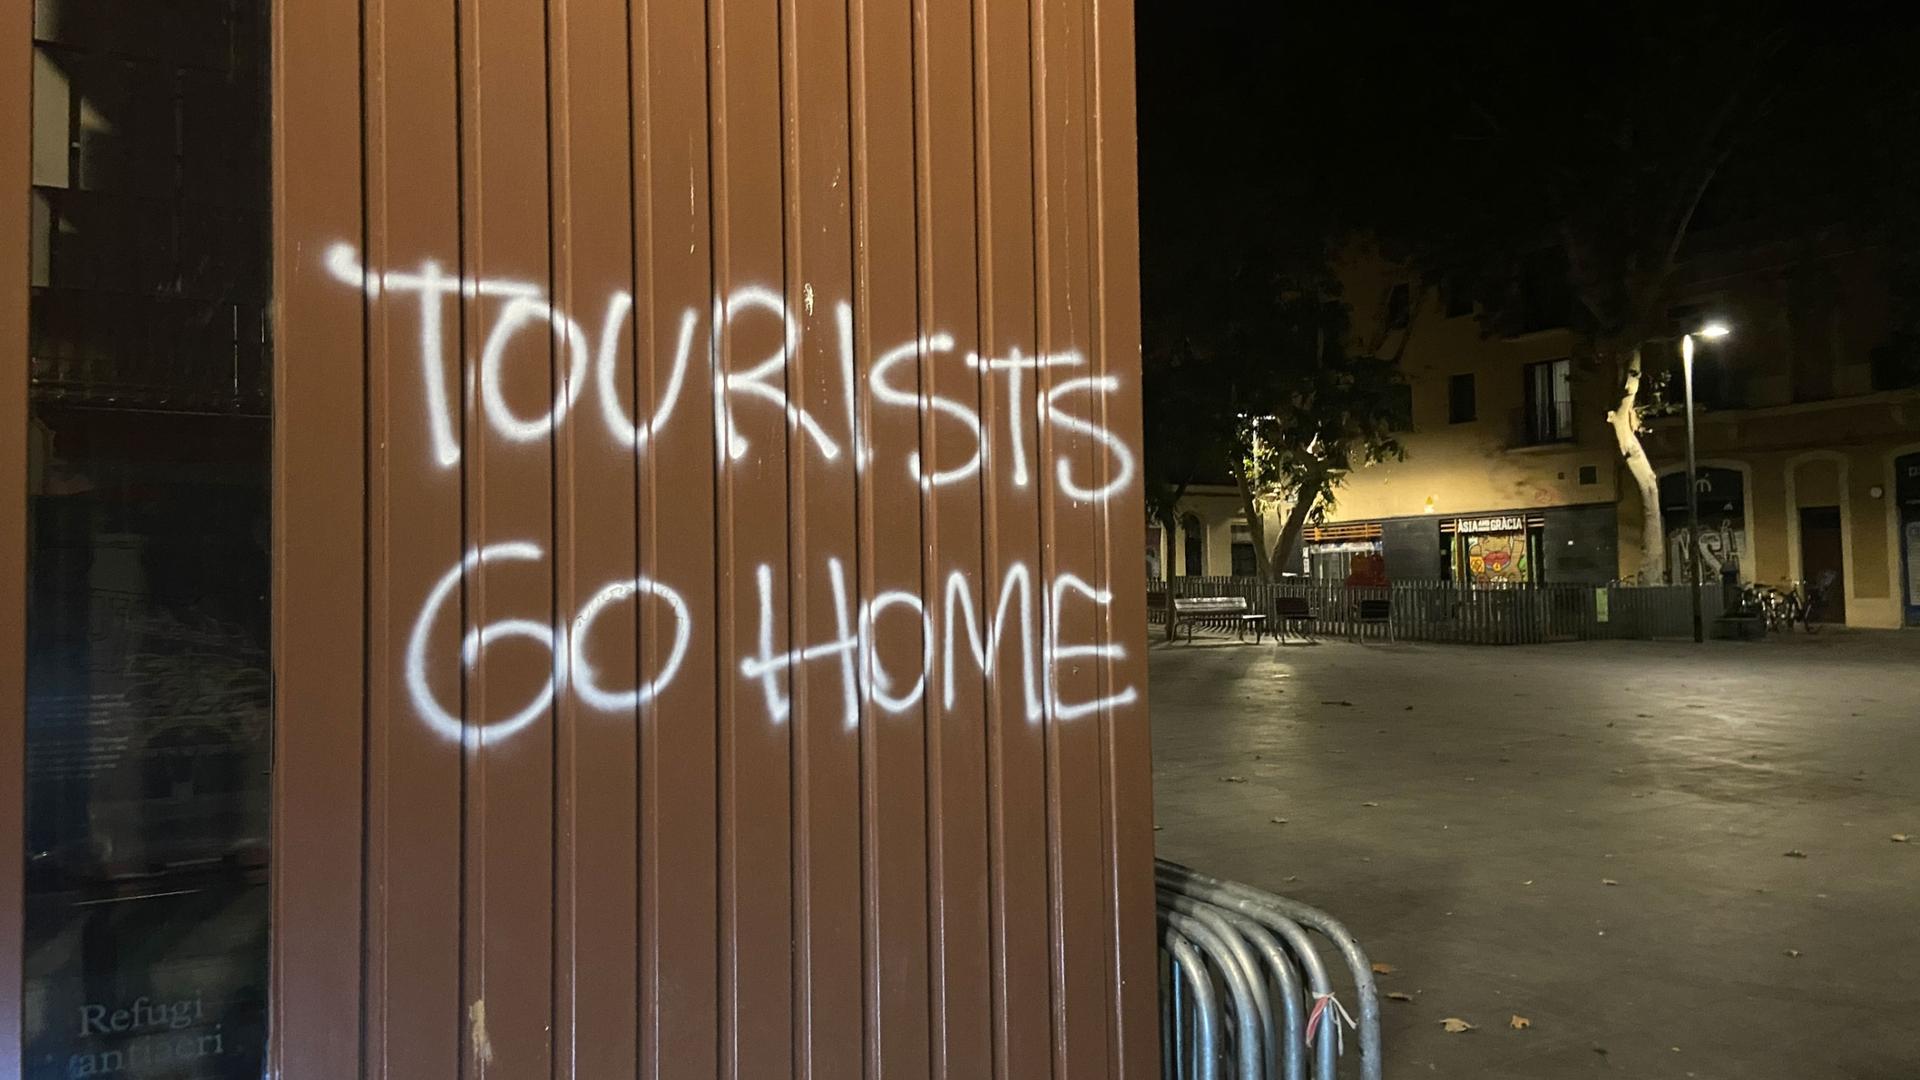 This graffiti says "tourists go home," and it's seen on a lot of walls in Gracia and other parts of Barcelona. 